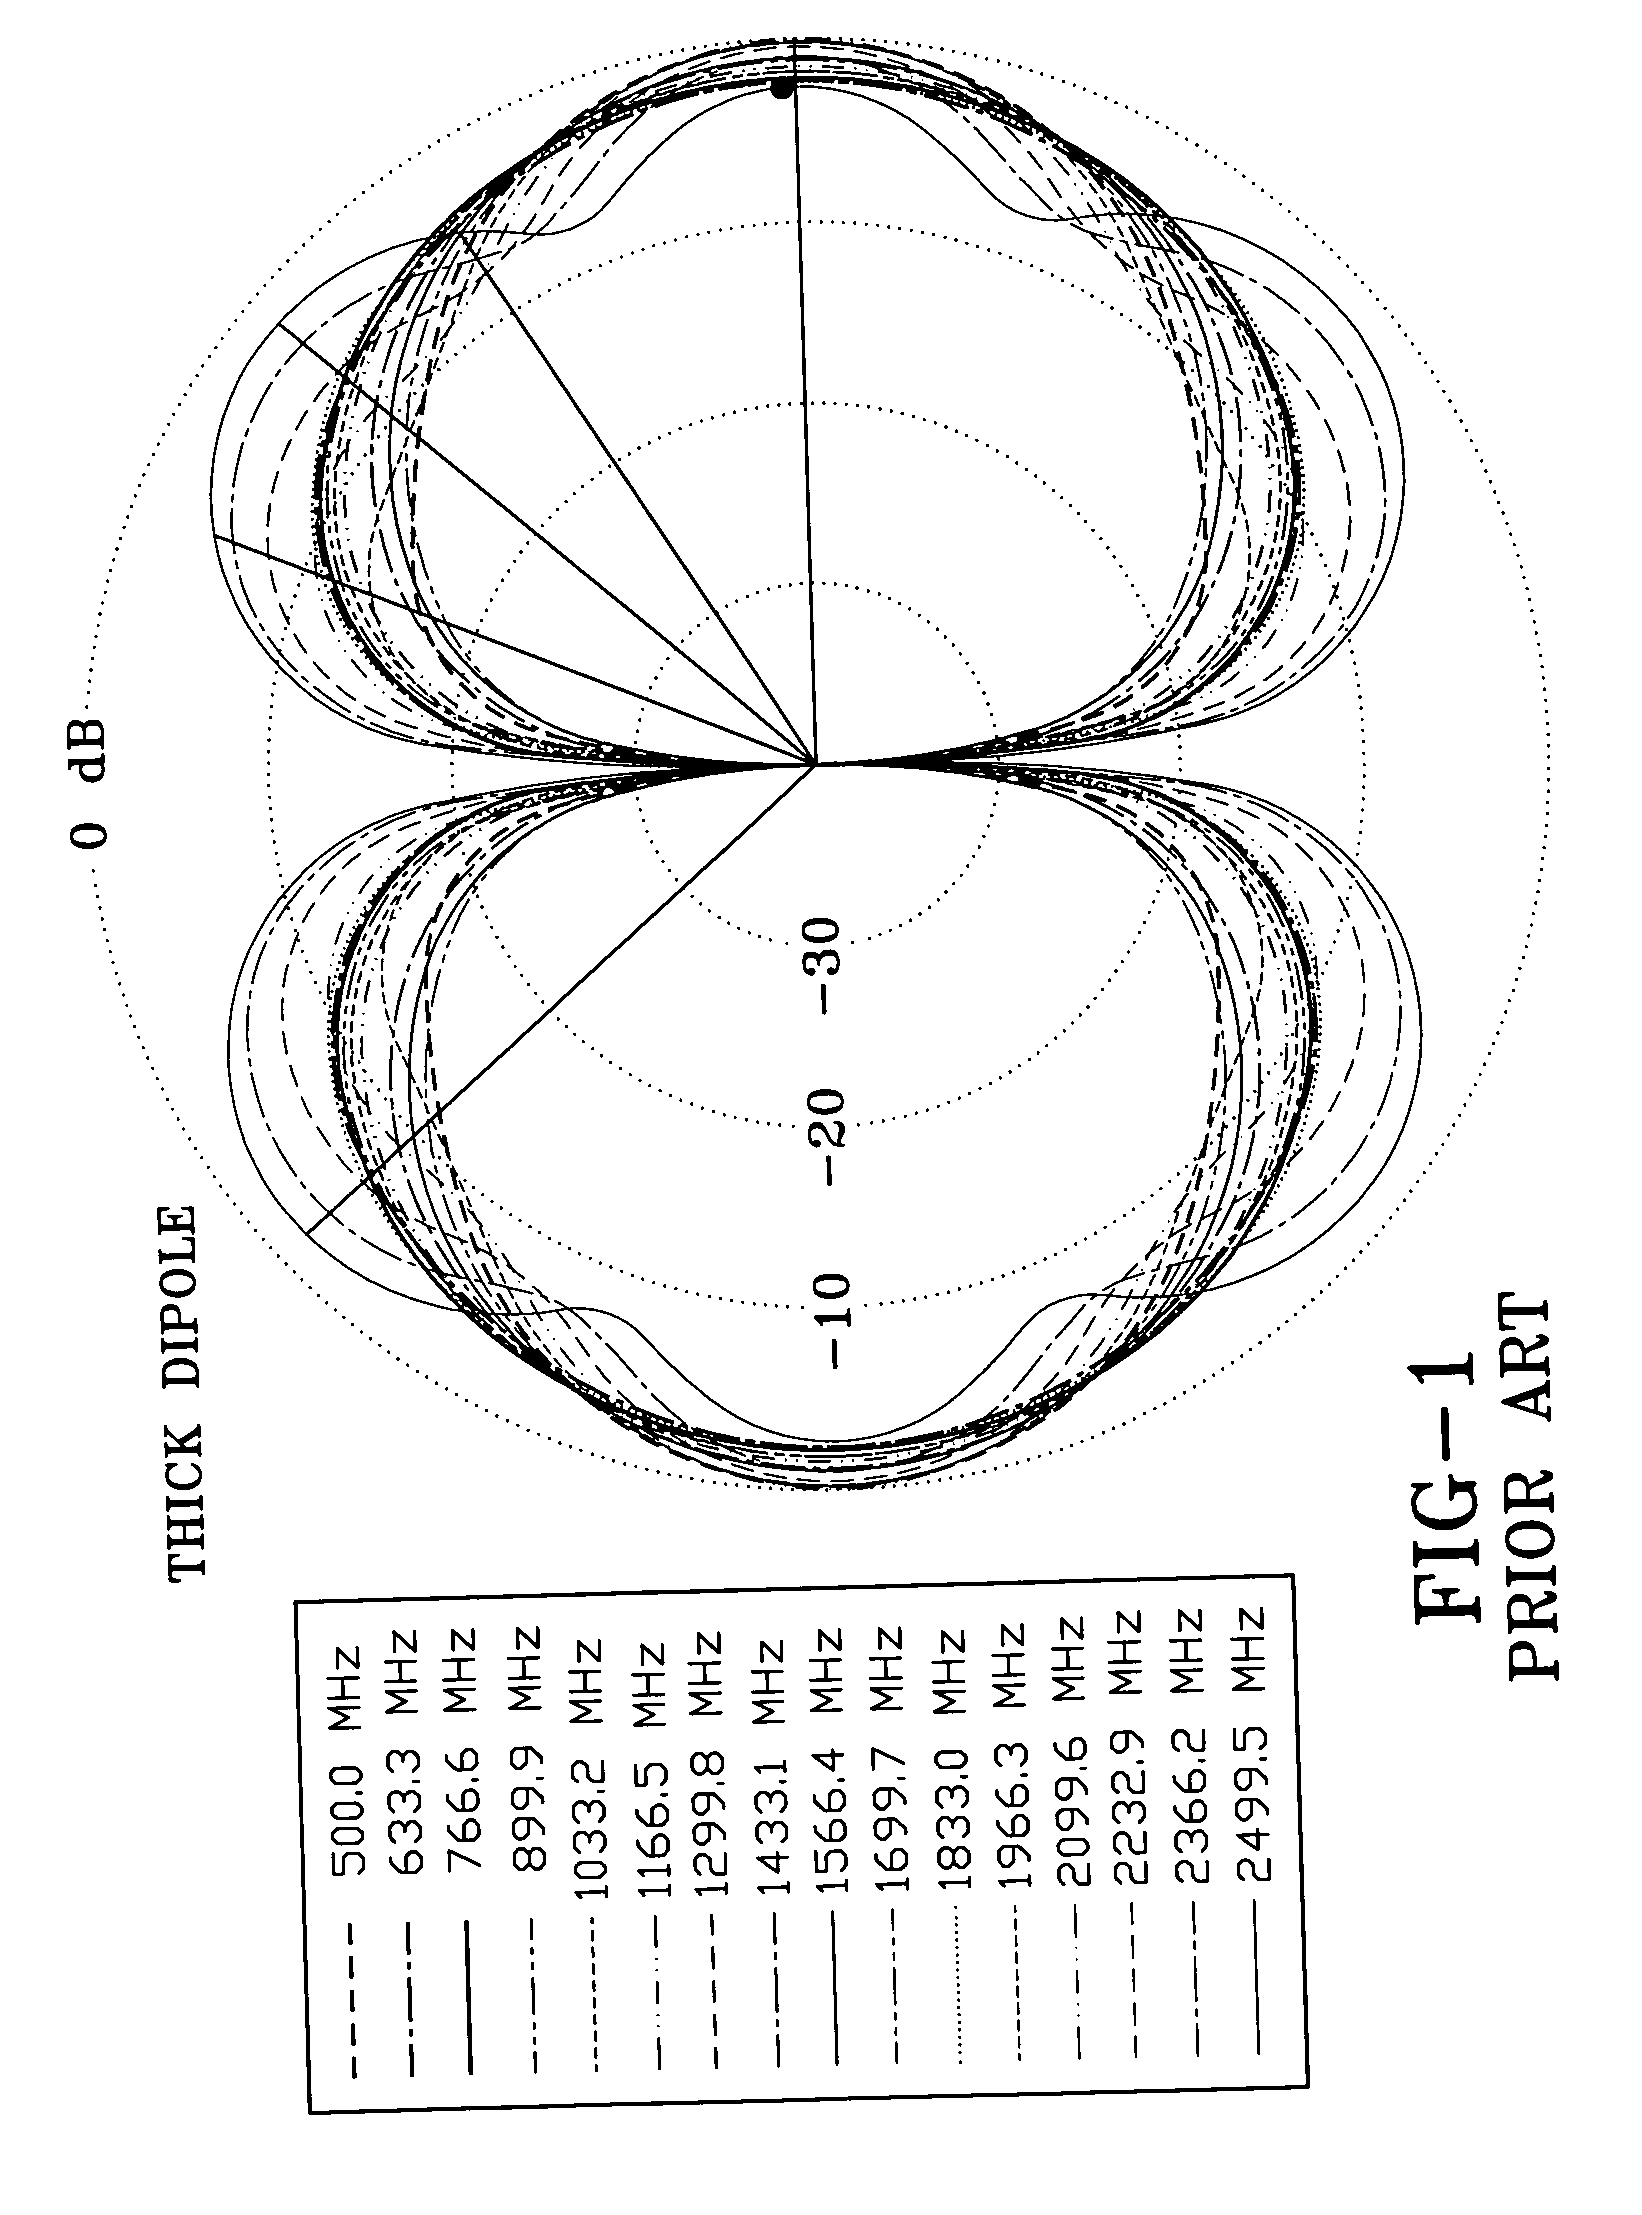 Wide band biconical antennas with an integrated matching system